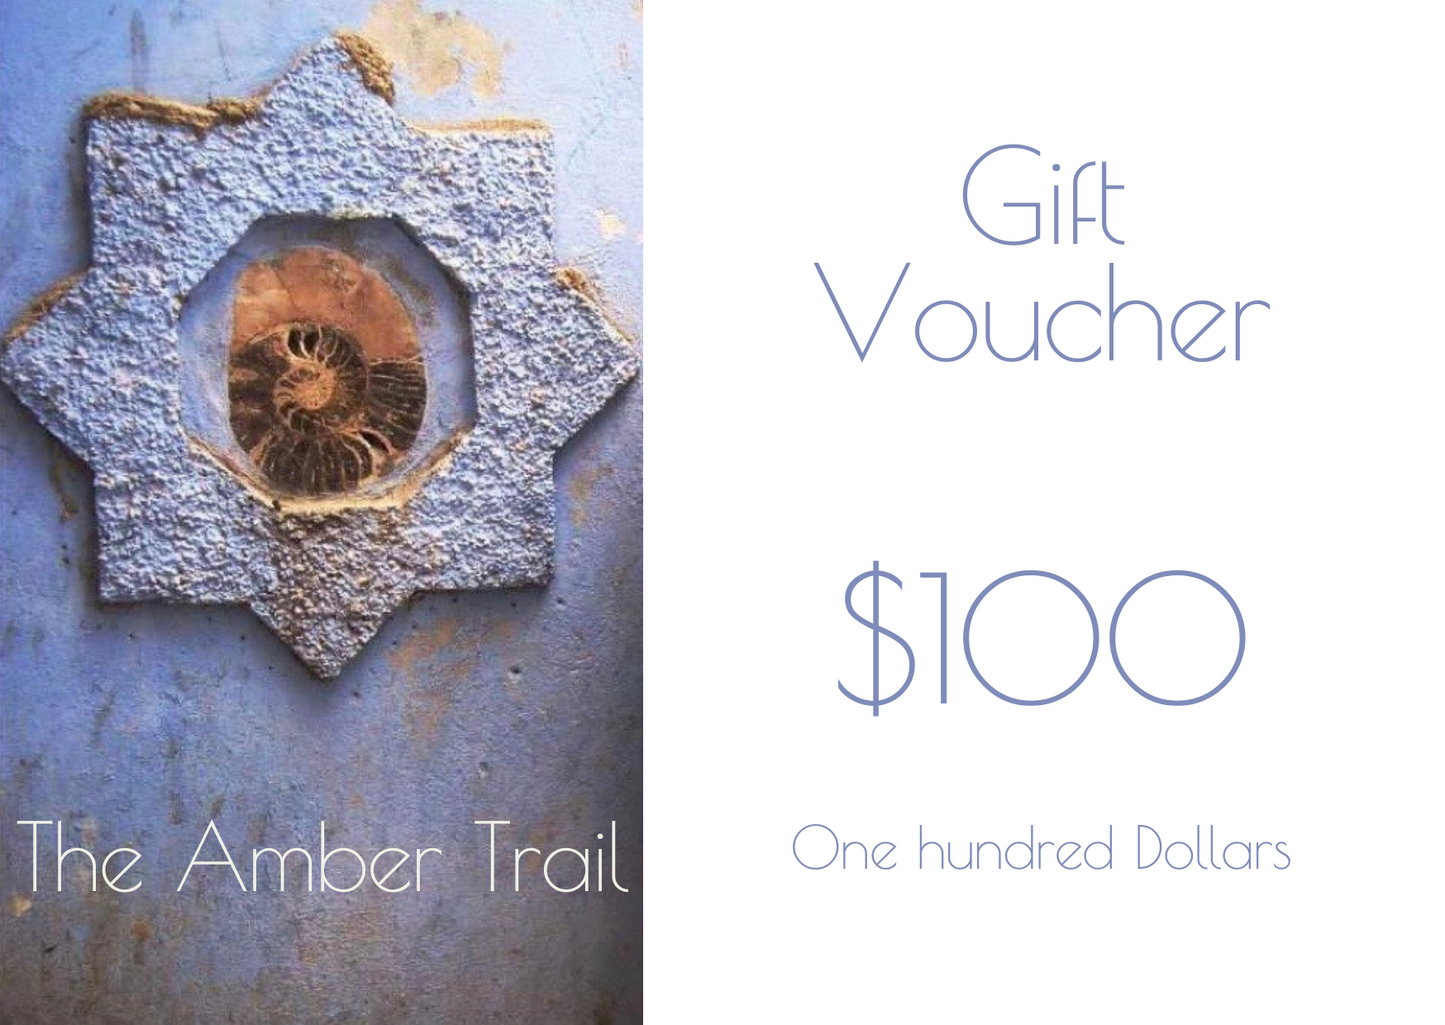 The Amber Trail Gift Voucher